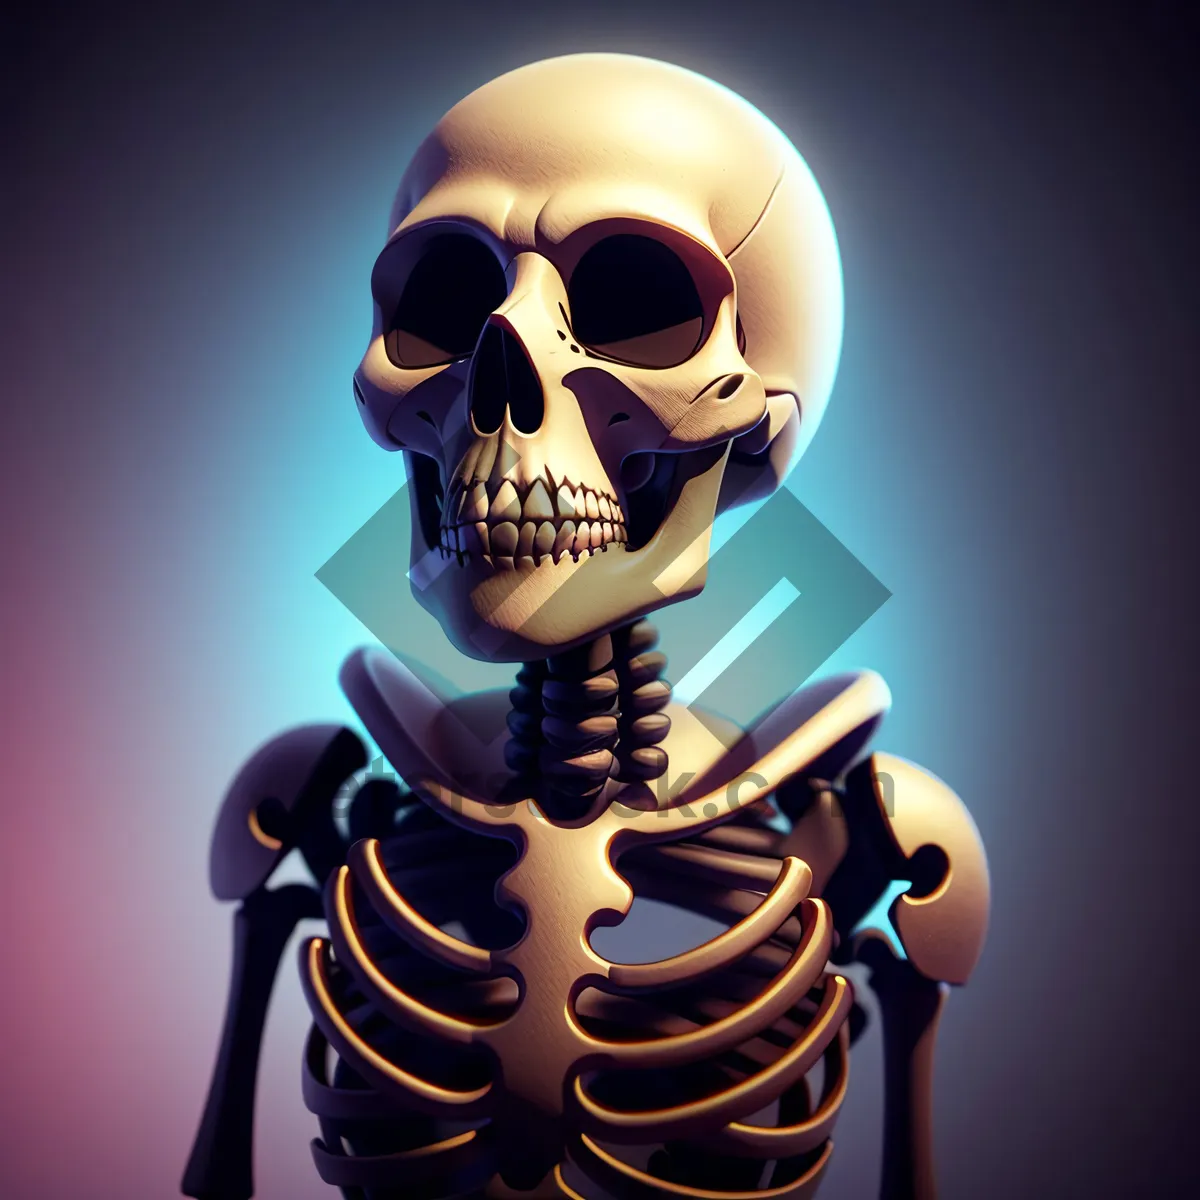 Picture of Terrifying Pirate Skeleton: A Spine-Chilling Cartoonesque Illustration